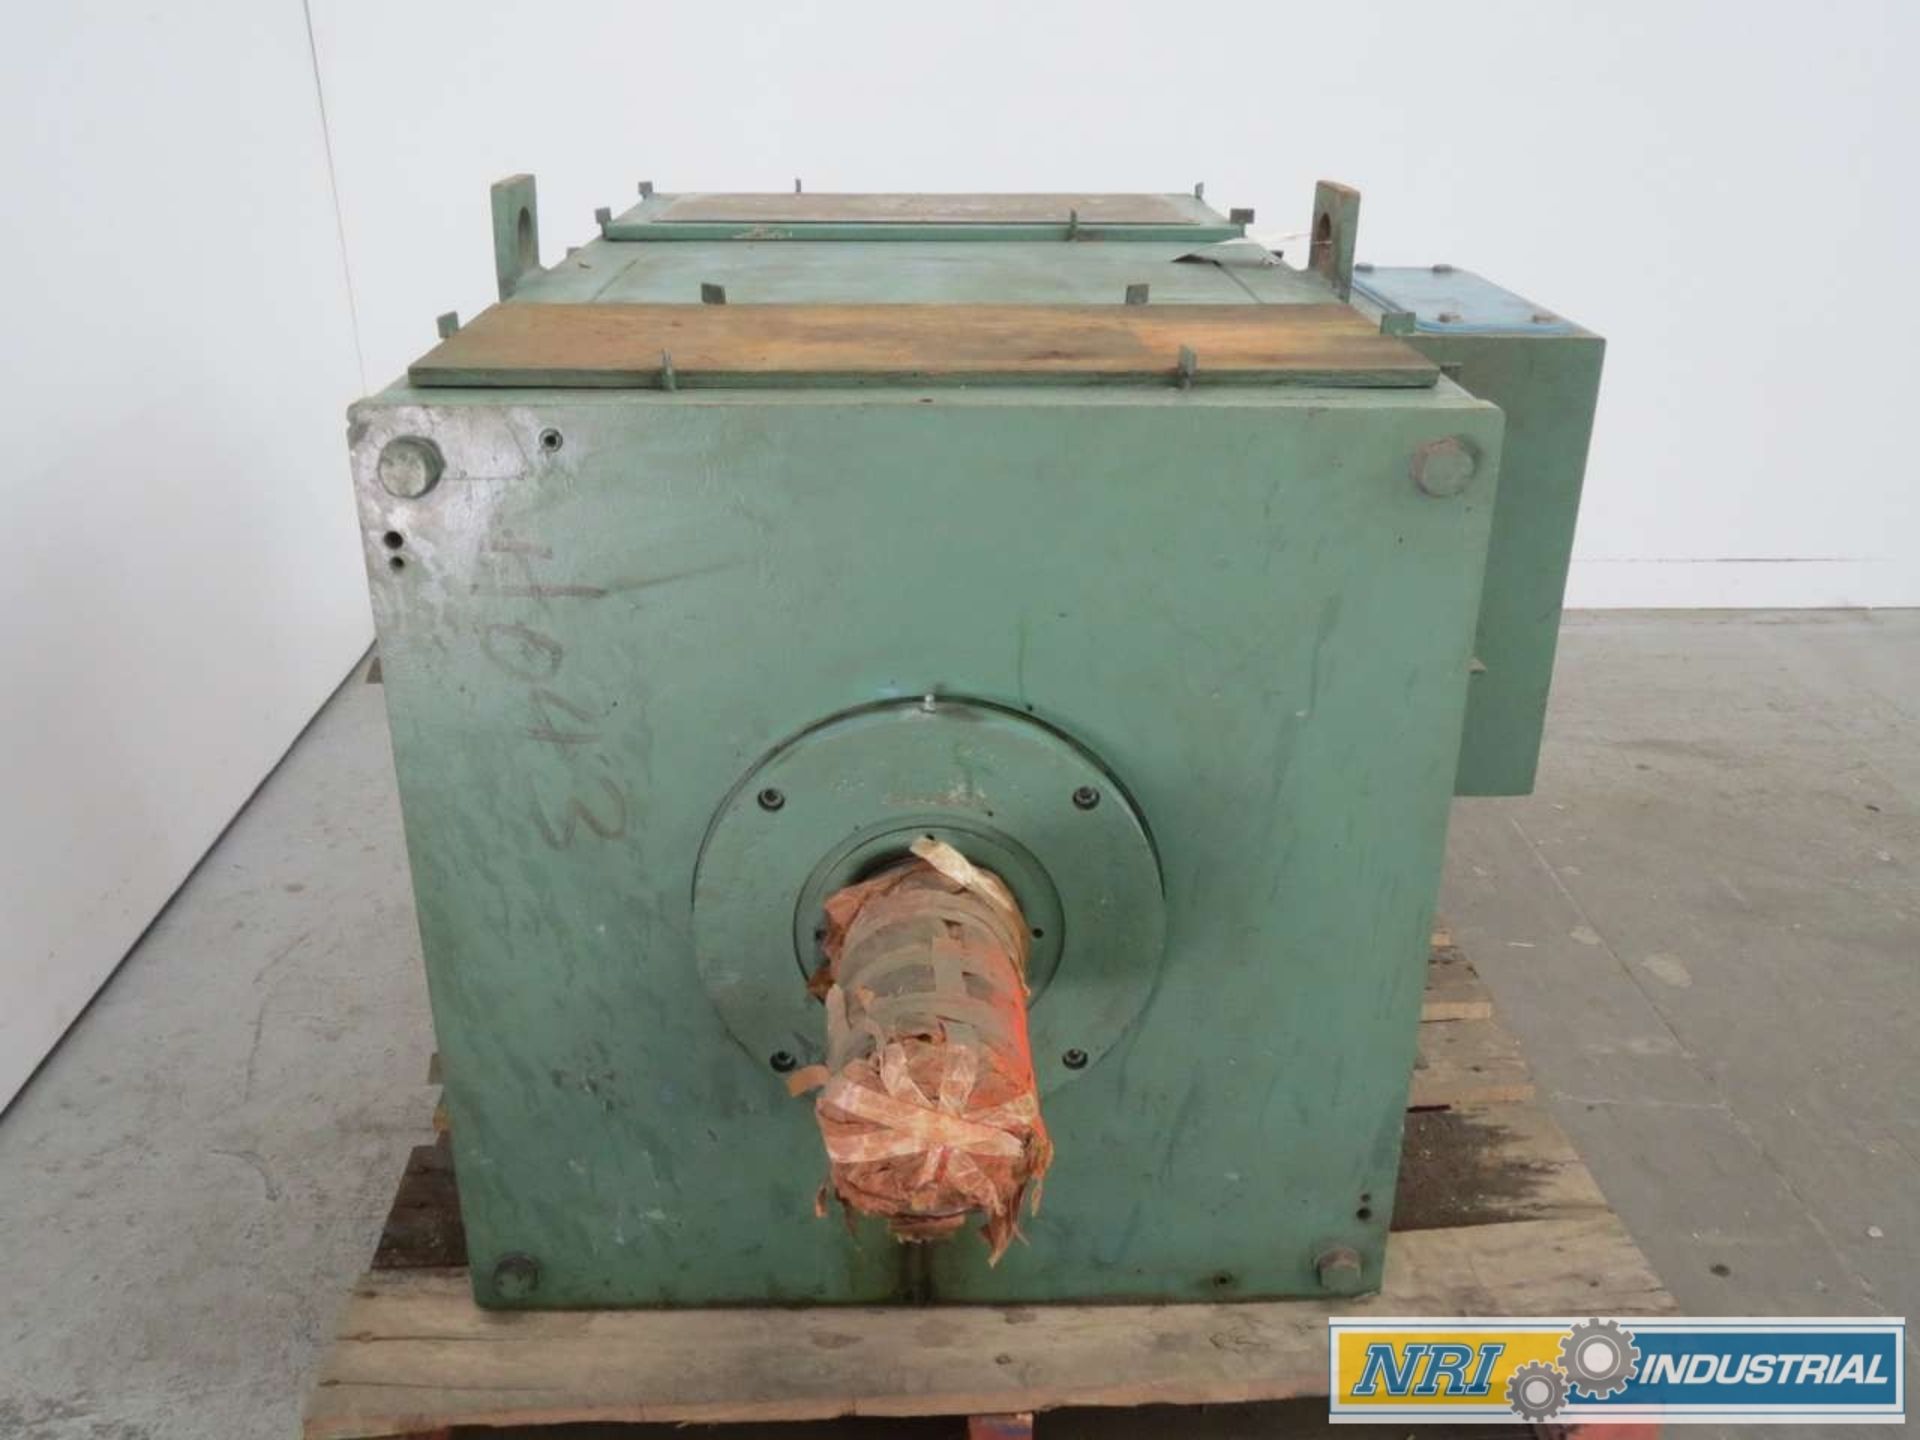 ASEA LAB 355 LA FORCED DRAUGHT 236KW 600V-DC 968RPM DC ELECTRIC MOTOR - Image 2 of 4